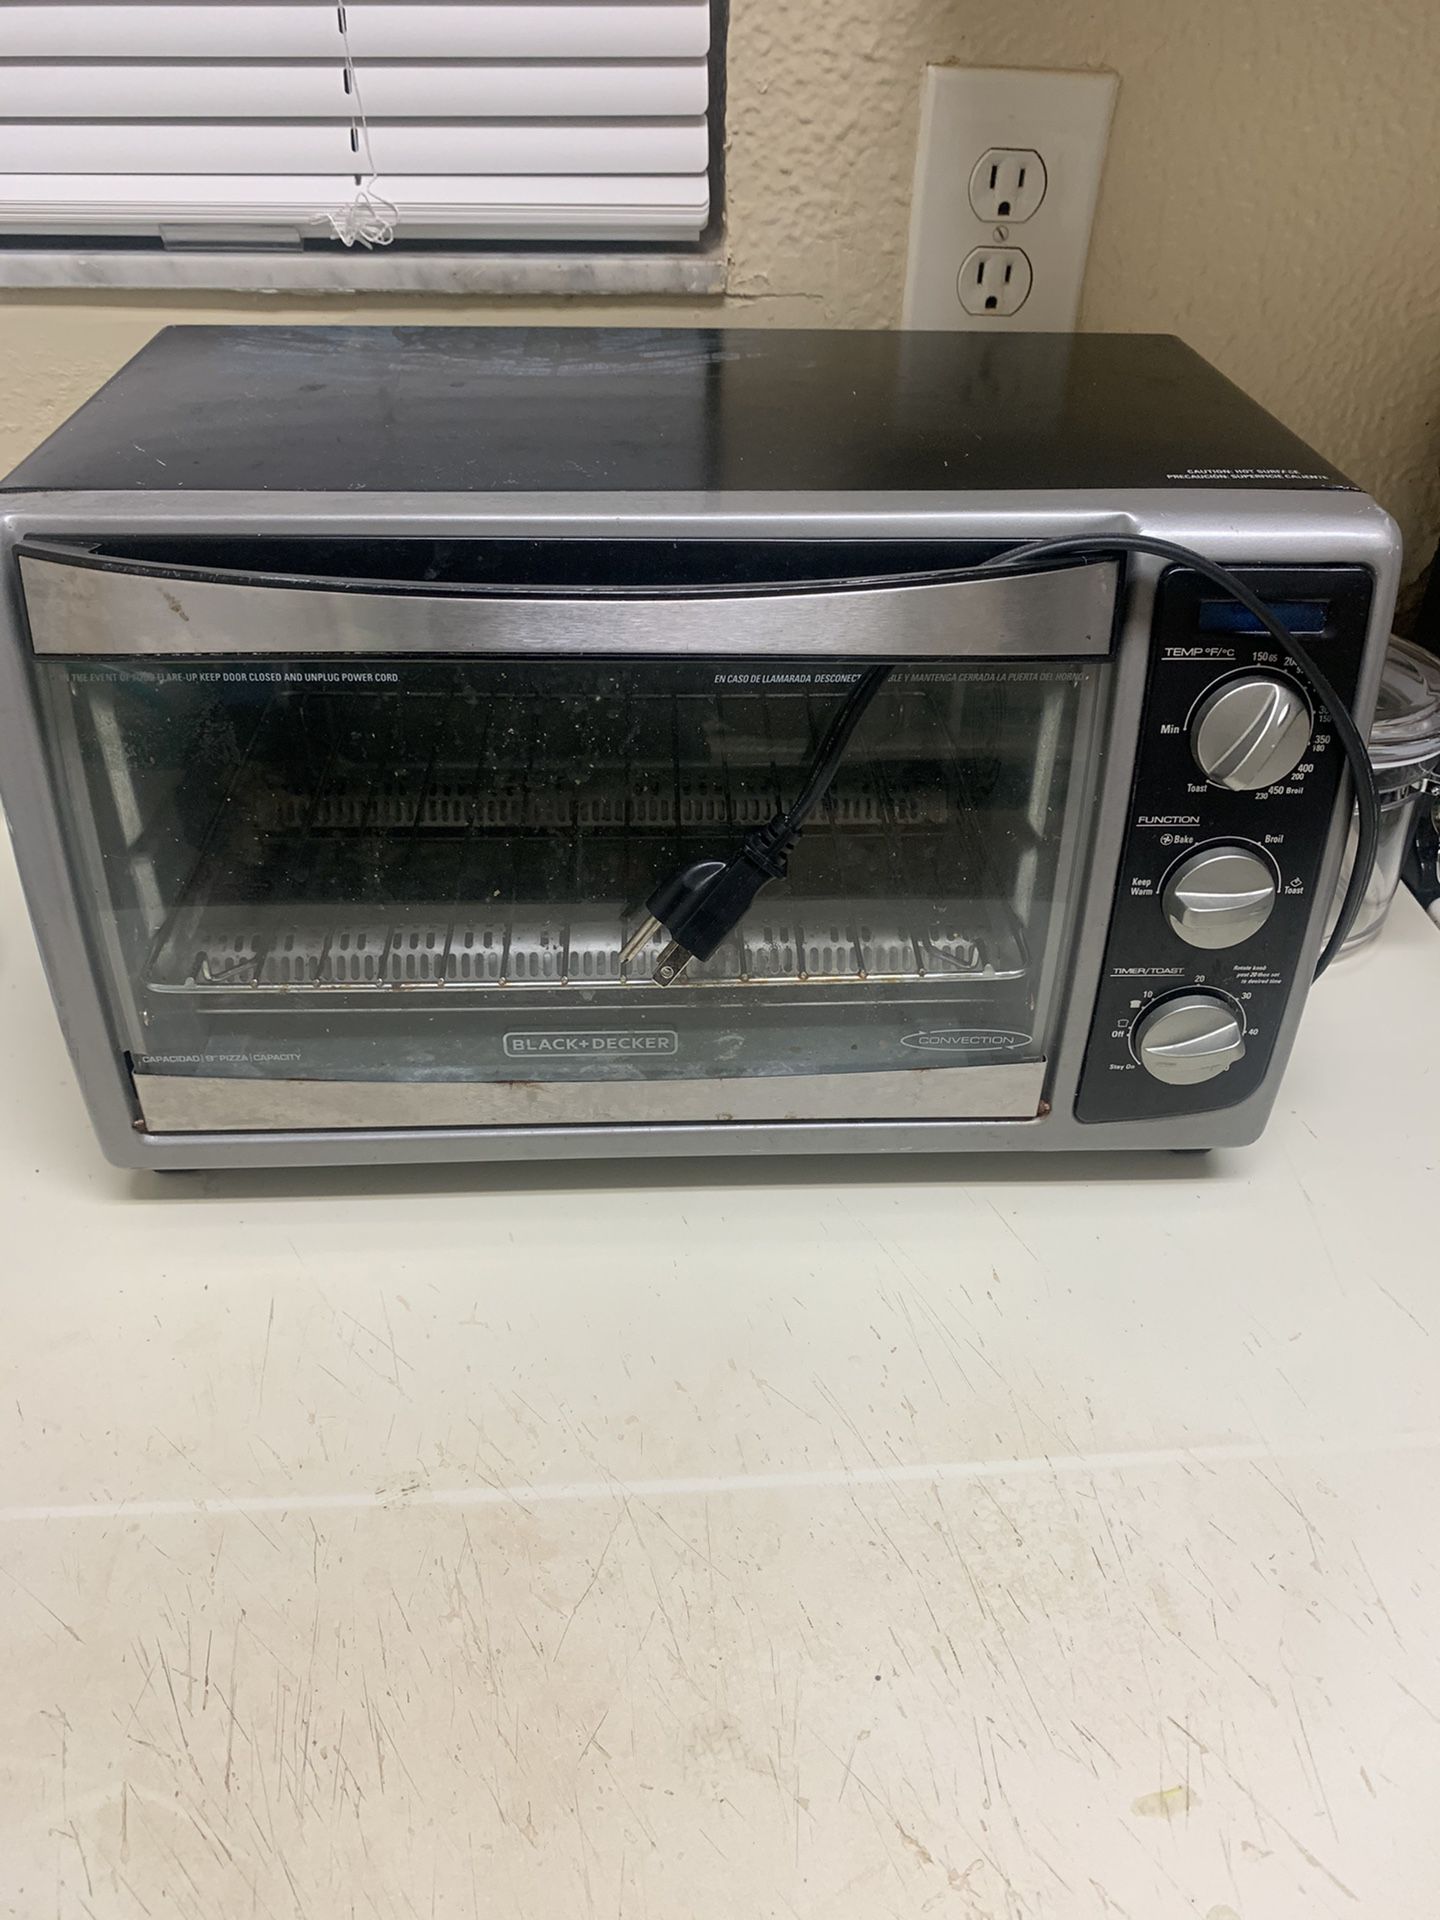 Toaster oven take it as is it is functional